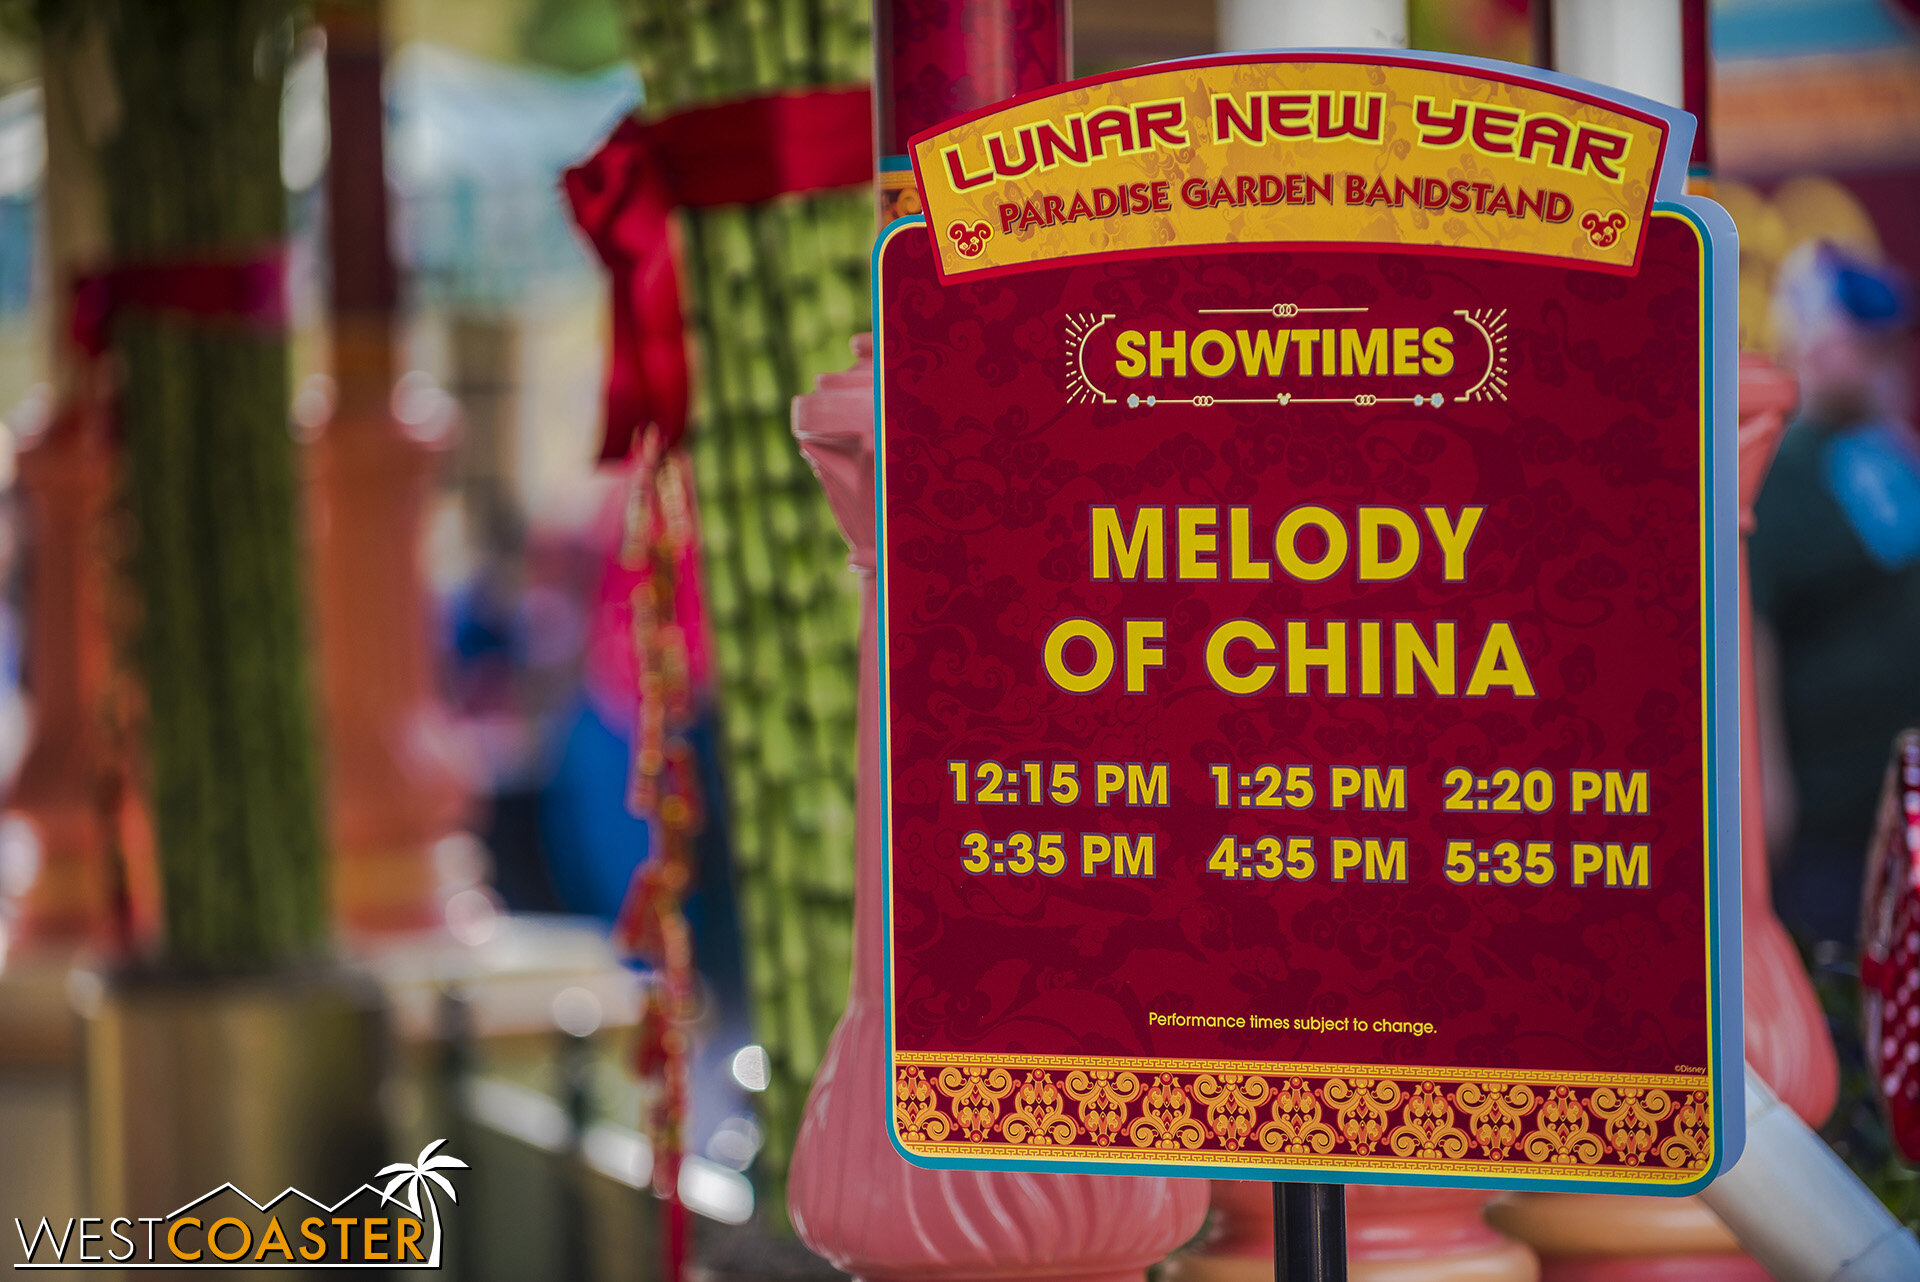  Melody of China didn’t appear to be performing the weekend we were there despite the signage, but they’re supposed to be a regular feature. 